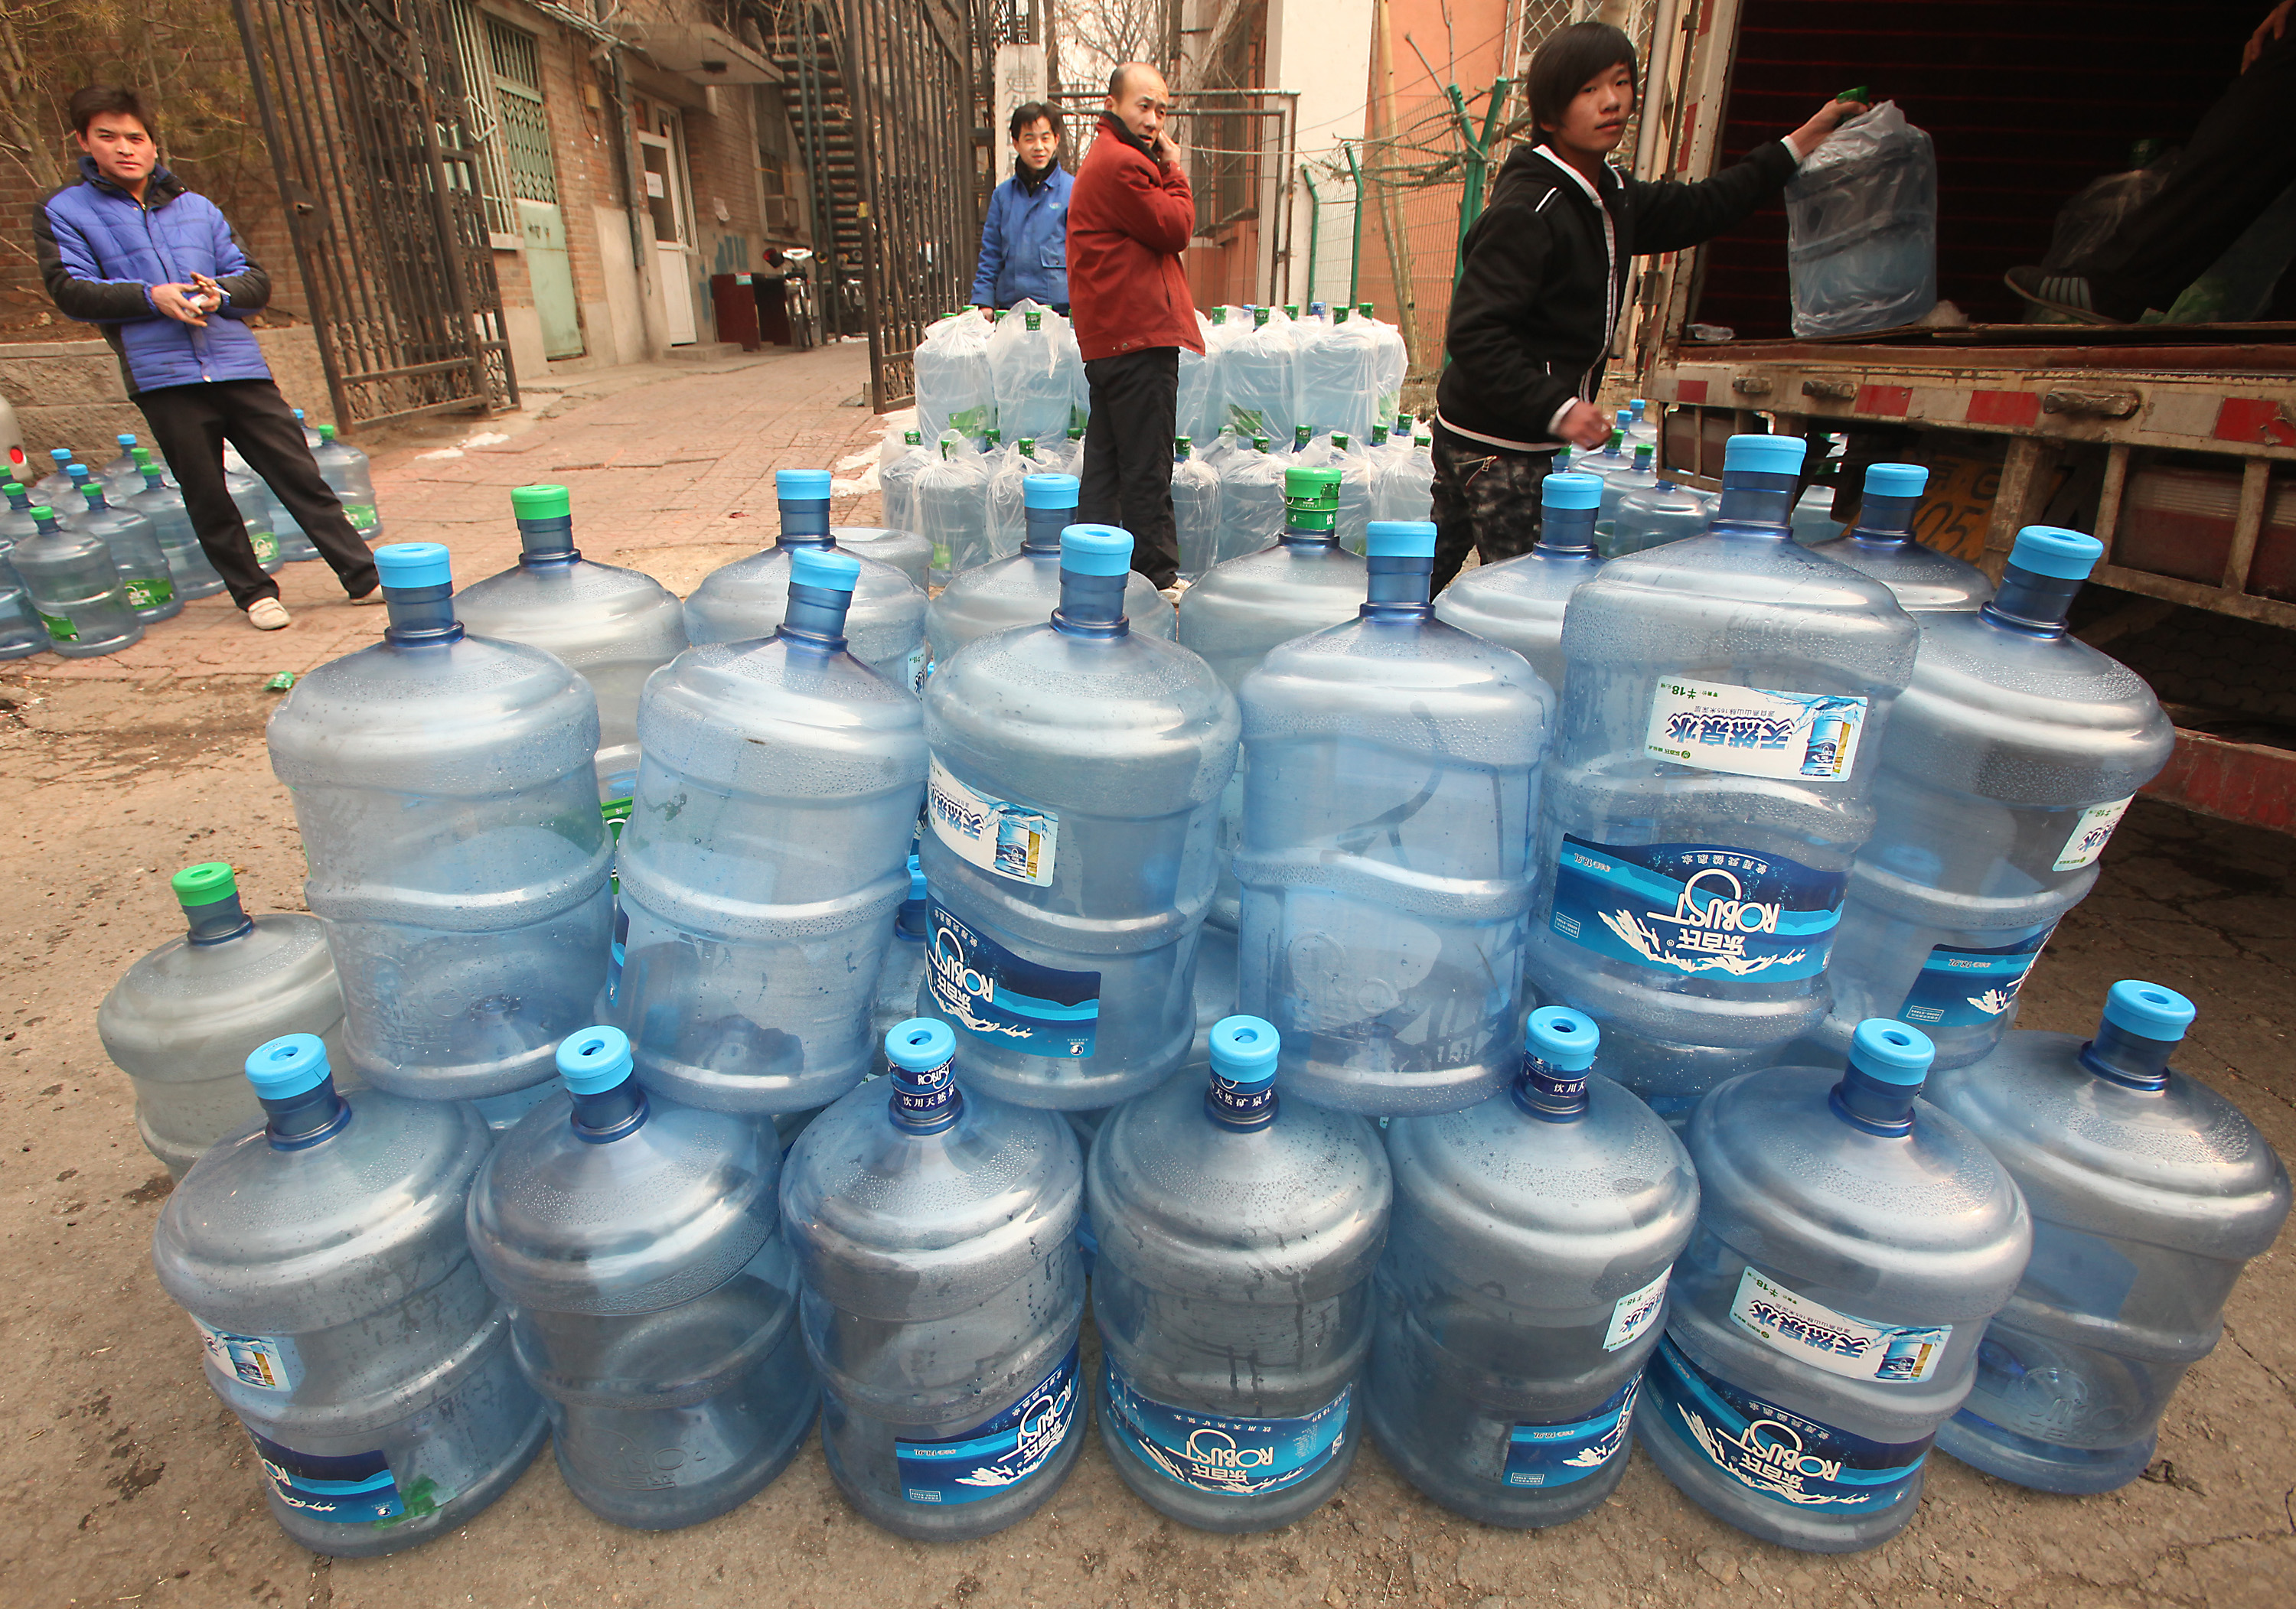 chinese-workers-deliver-drinking-water-to-housing-estate-beijing-137.jpg